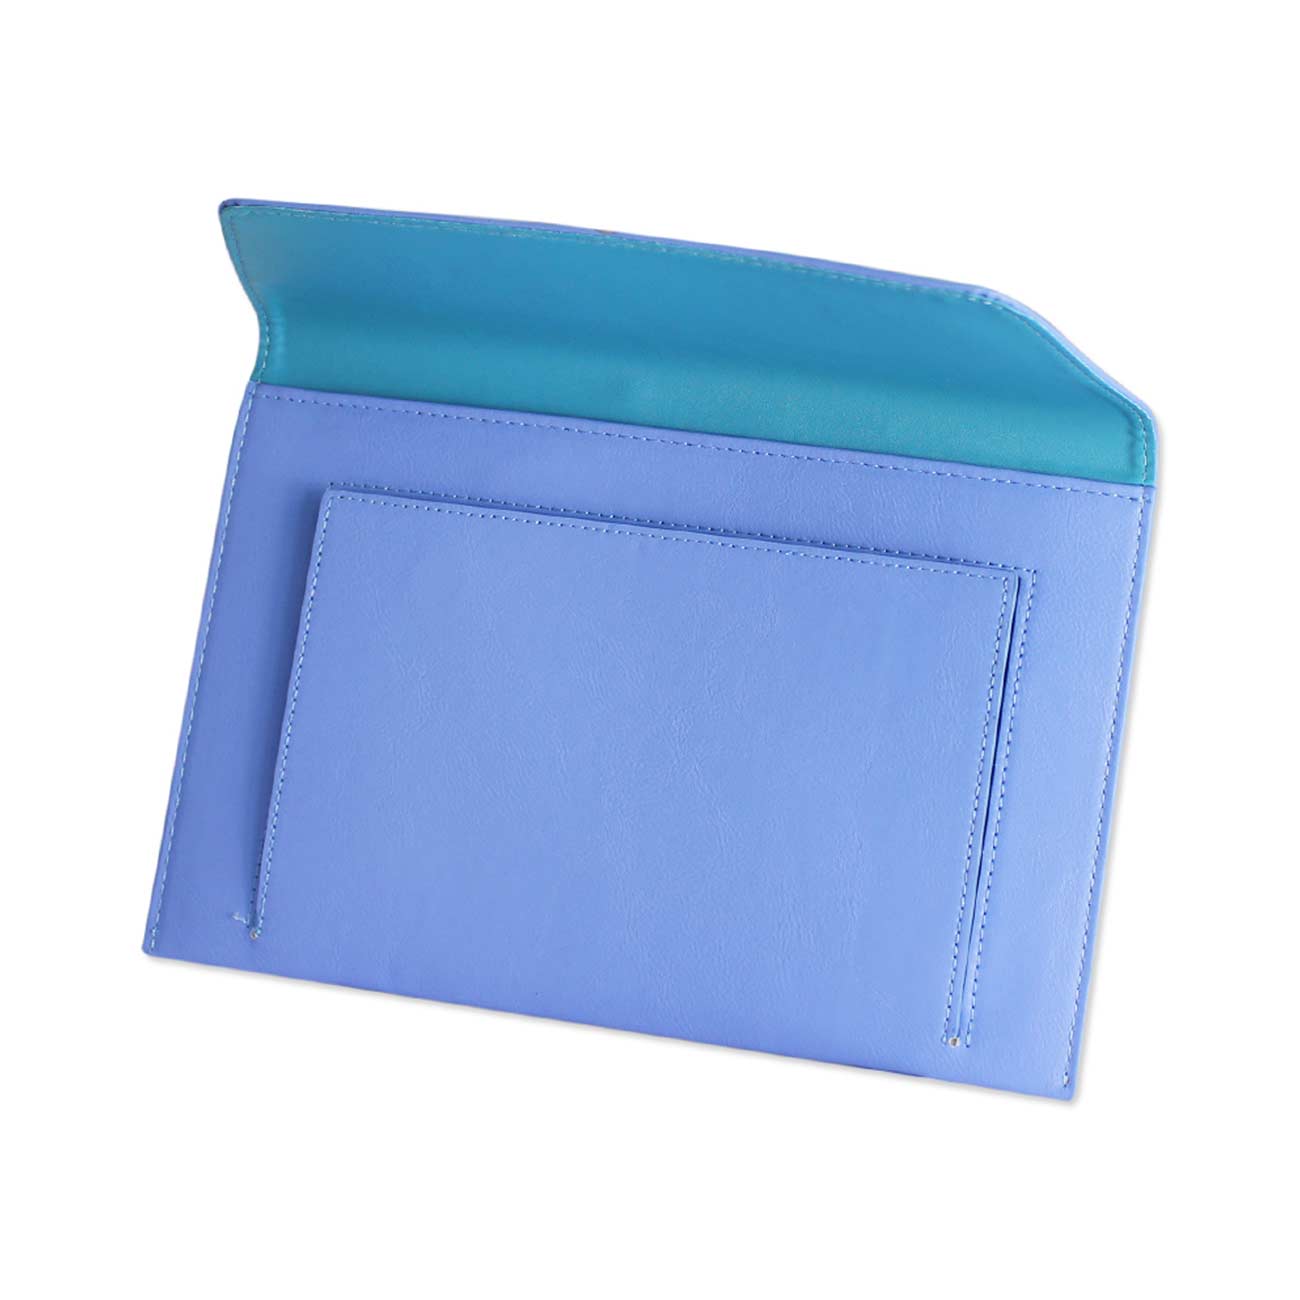 REIKO PREMIUM LEATHER CASE POUCH FOR 8.9INCHES IPADS AND TABLETS In BLUE